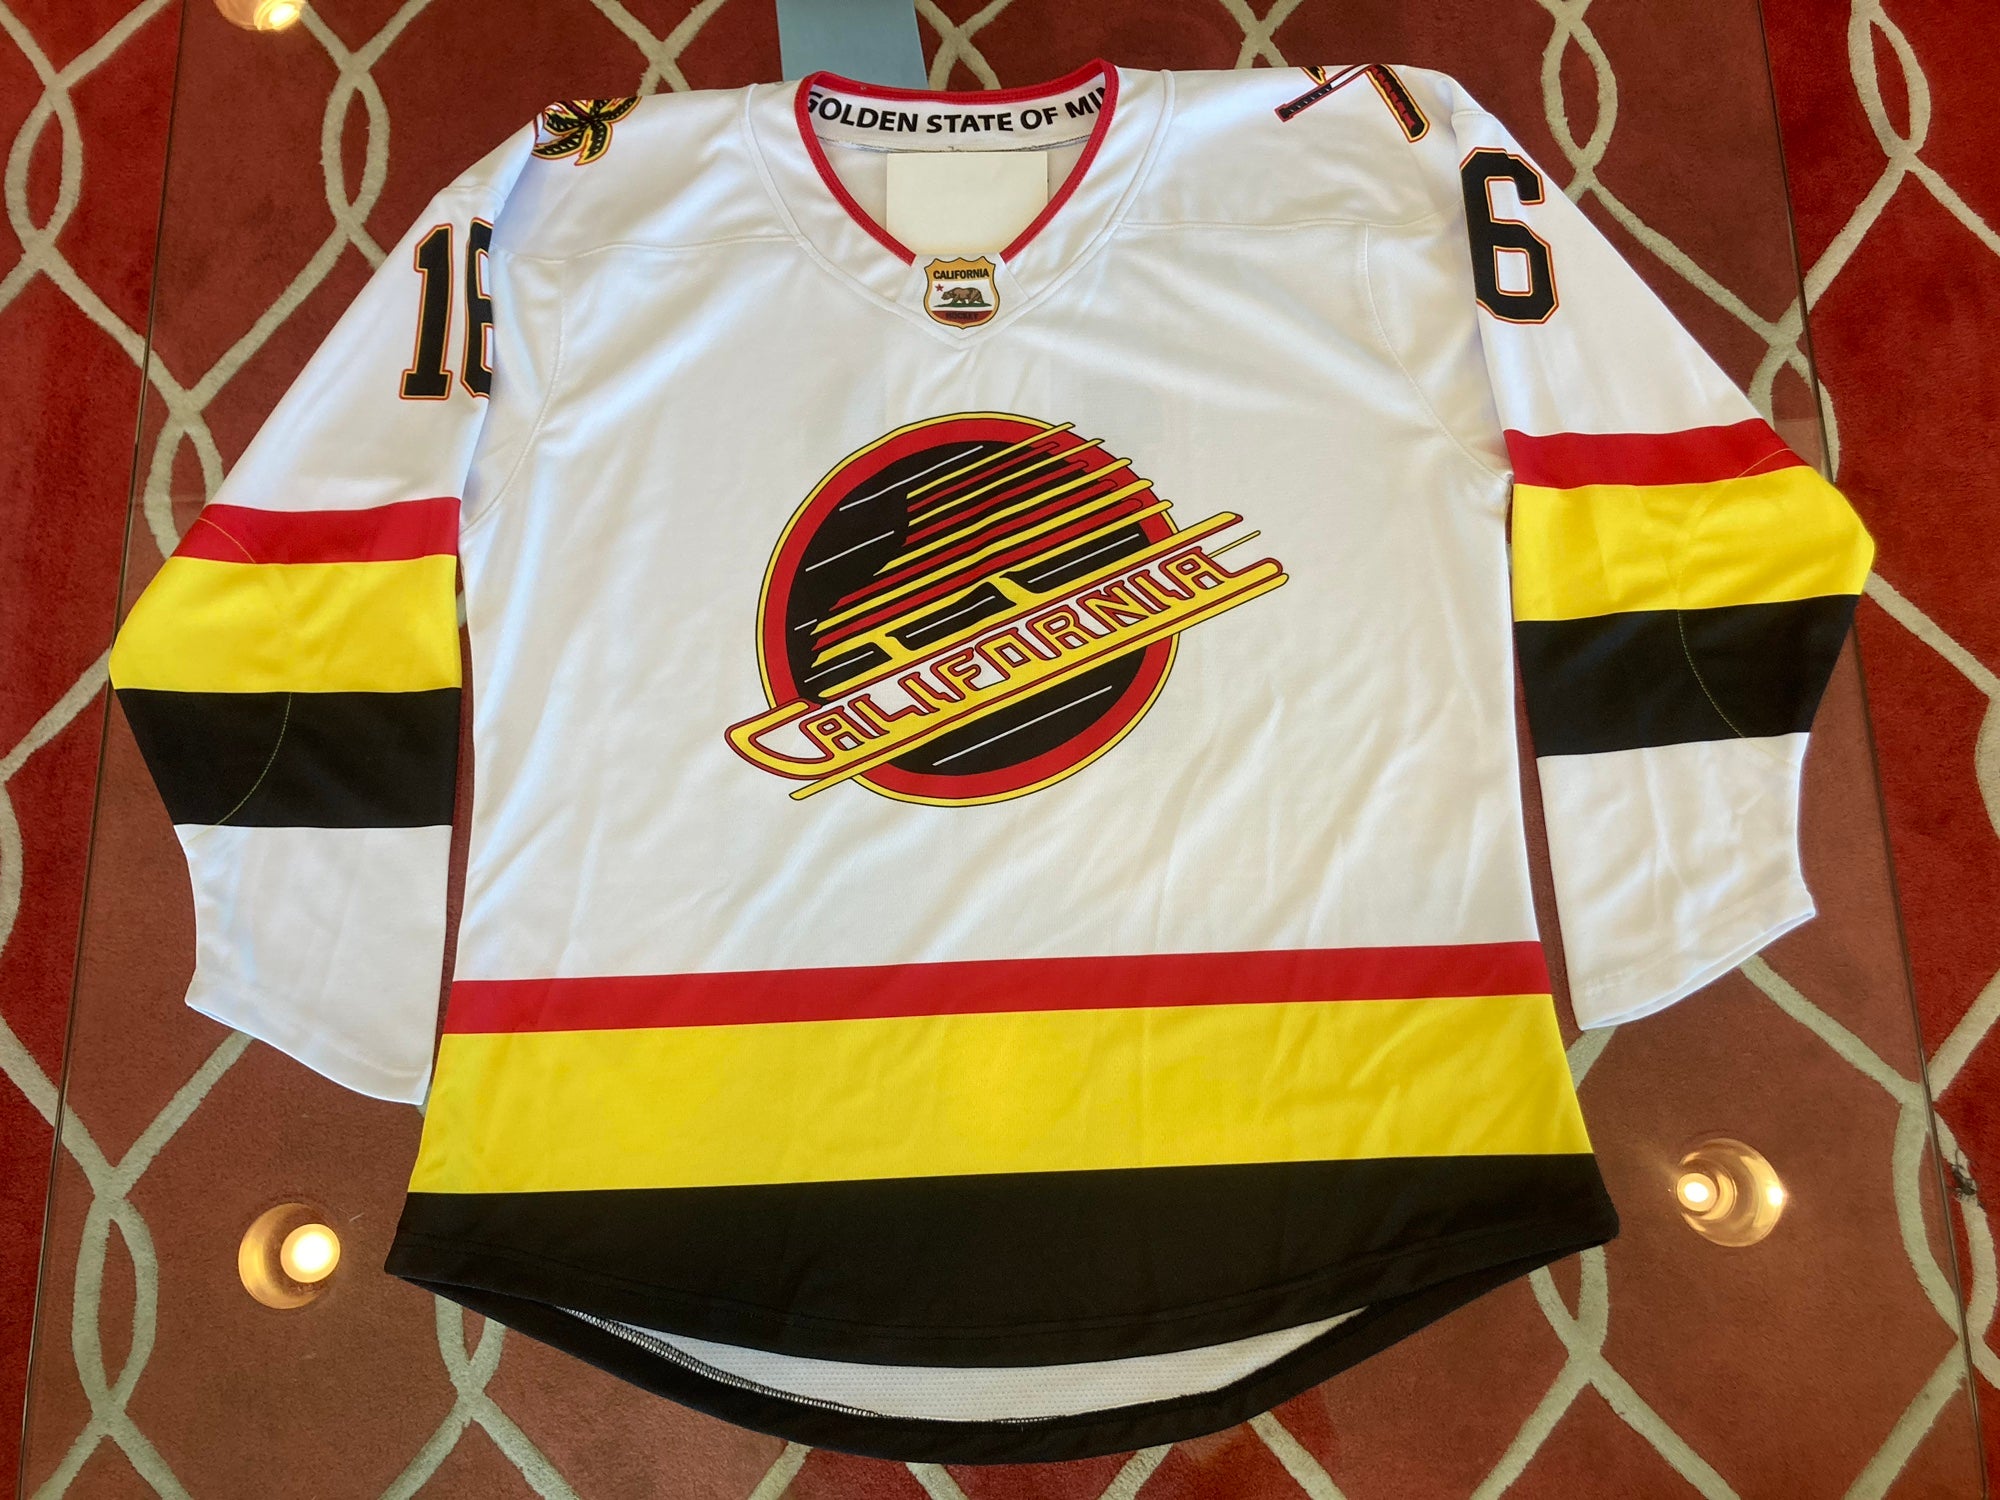 vancouver canucks 70s jersey